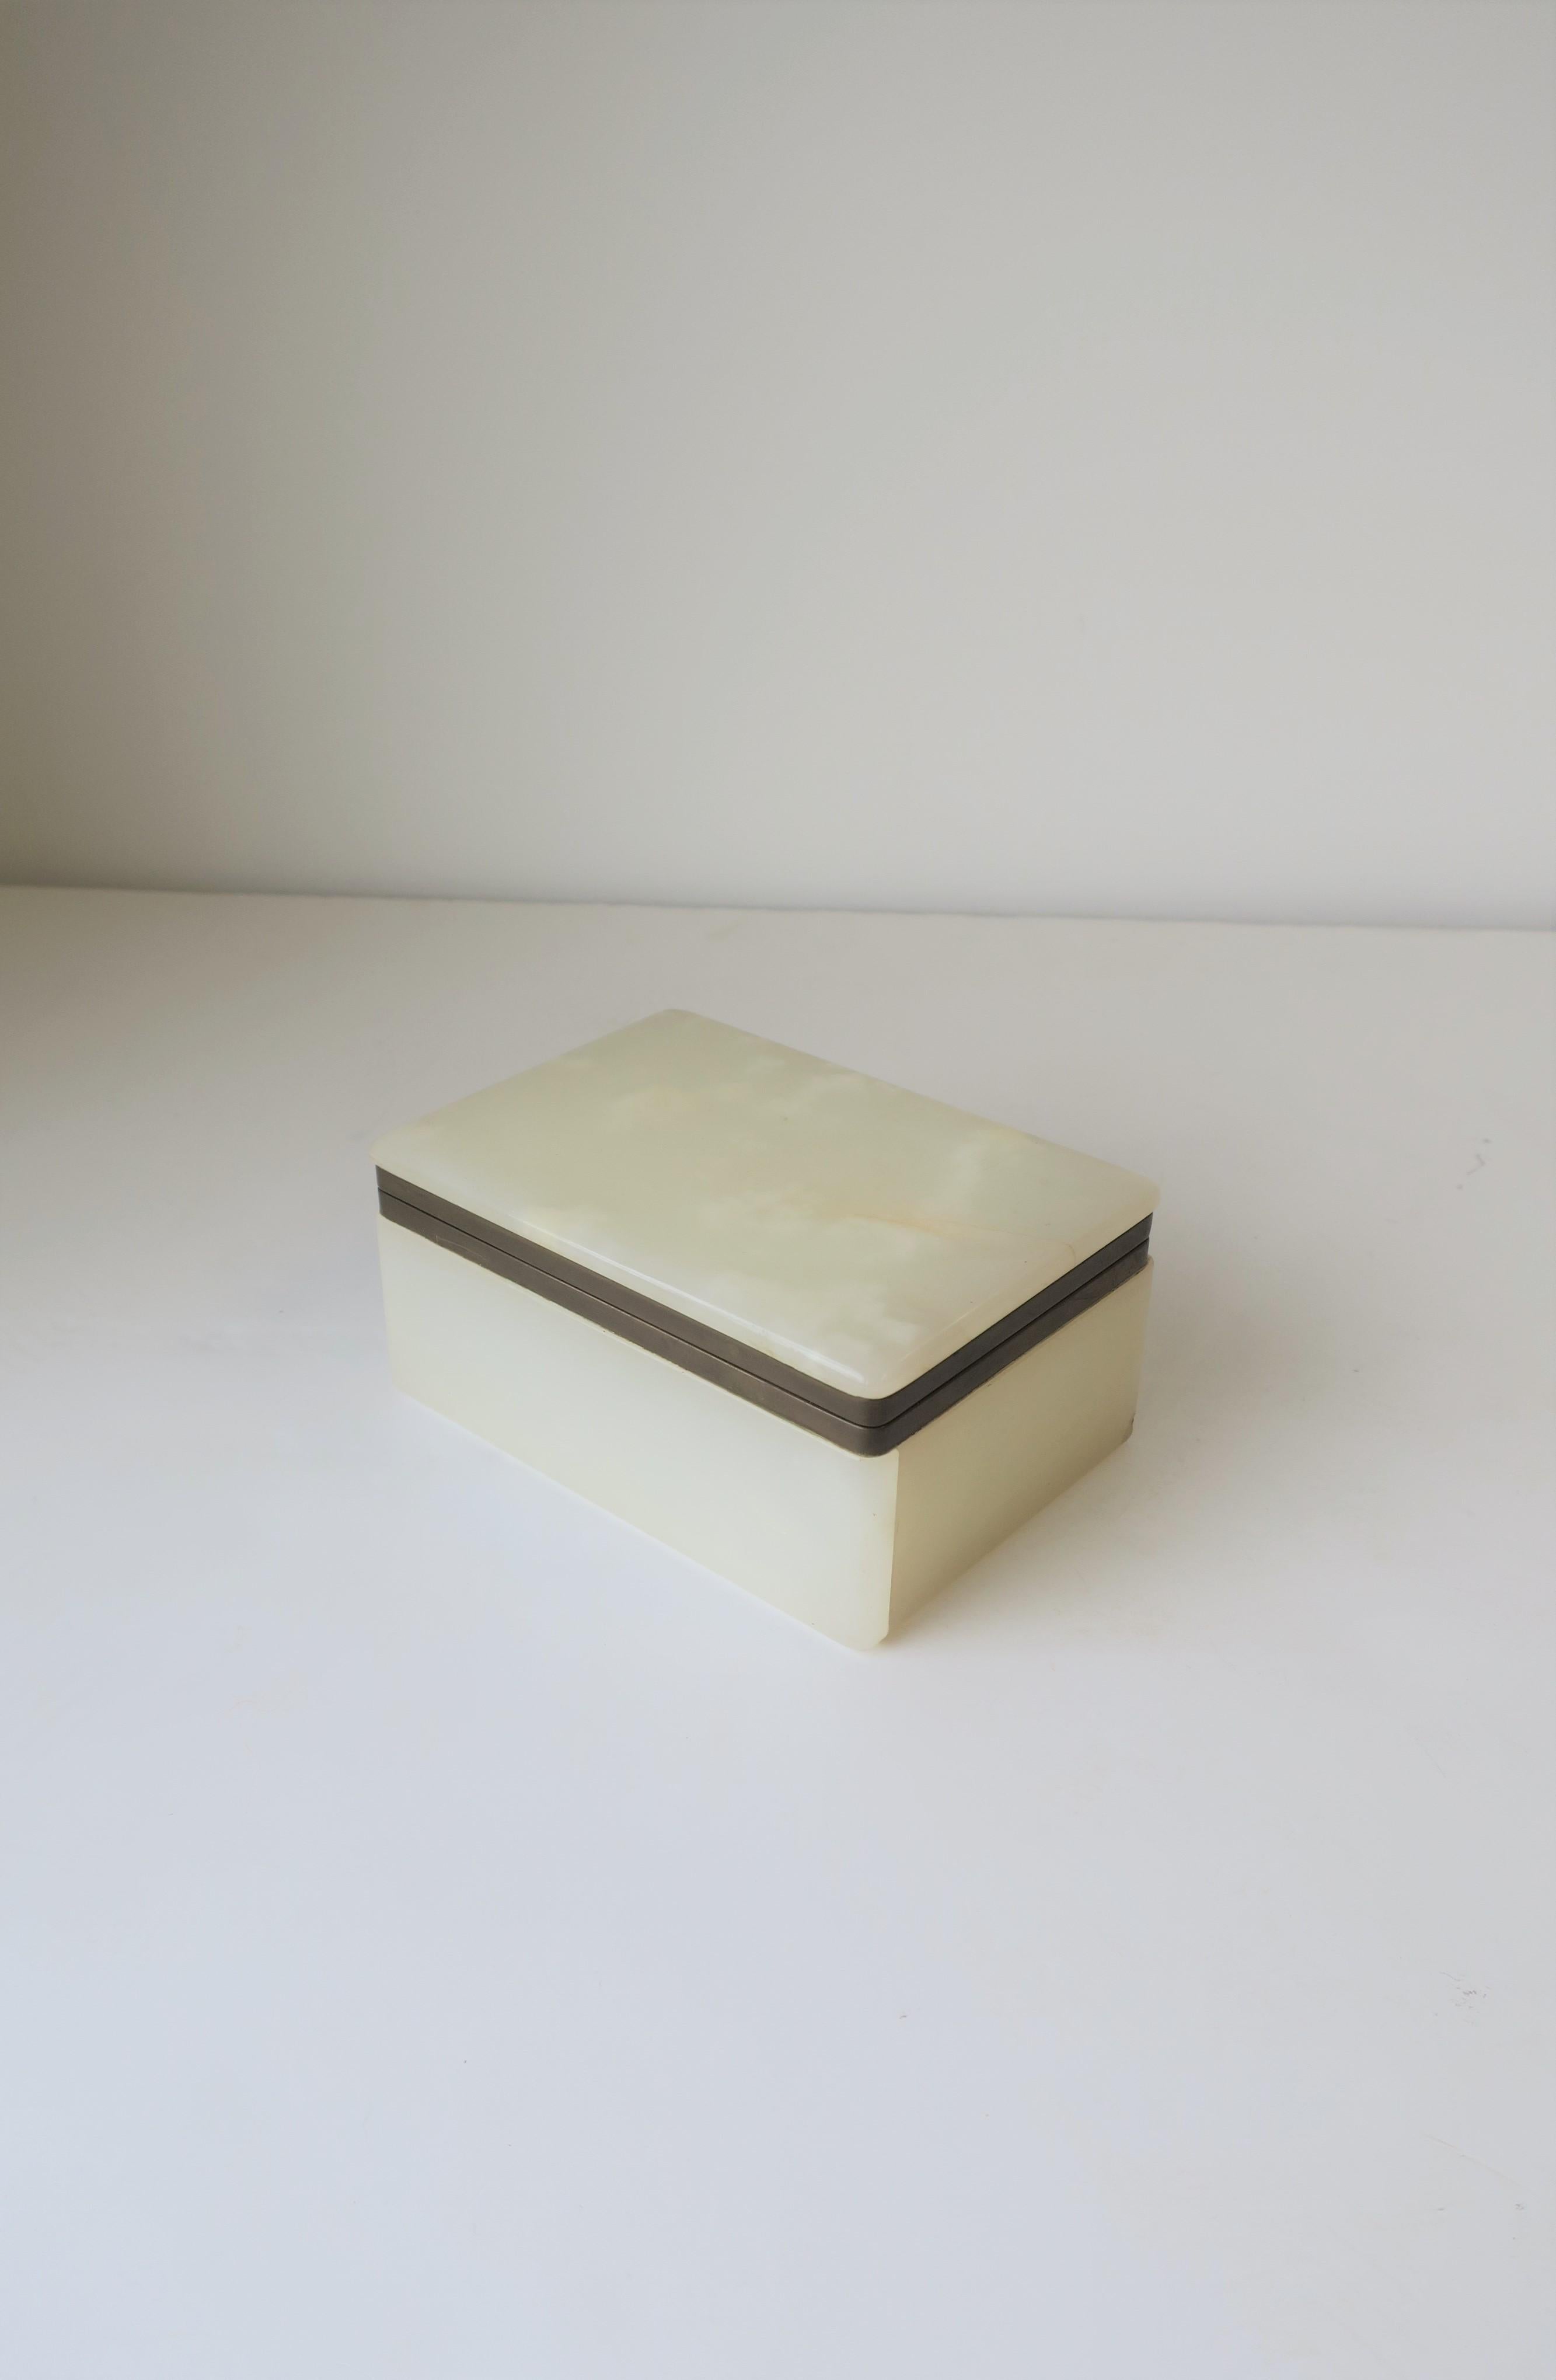 A beautiful and substantial Belgian Modern white/off-white onyx marble and brass hinged jewelry or decorative box, circa early 20th century, Belgium. Box is rectangular in shape and can hold jewelry (as demonstrated) or other small items on a desk,